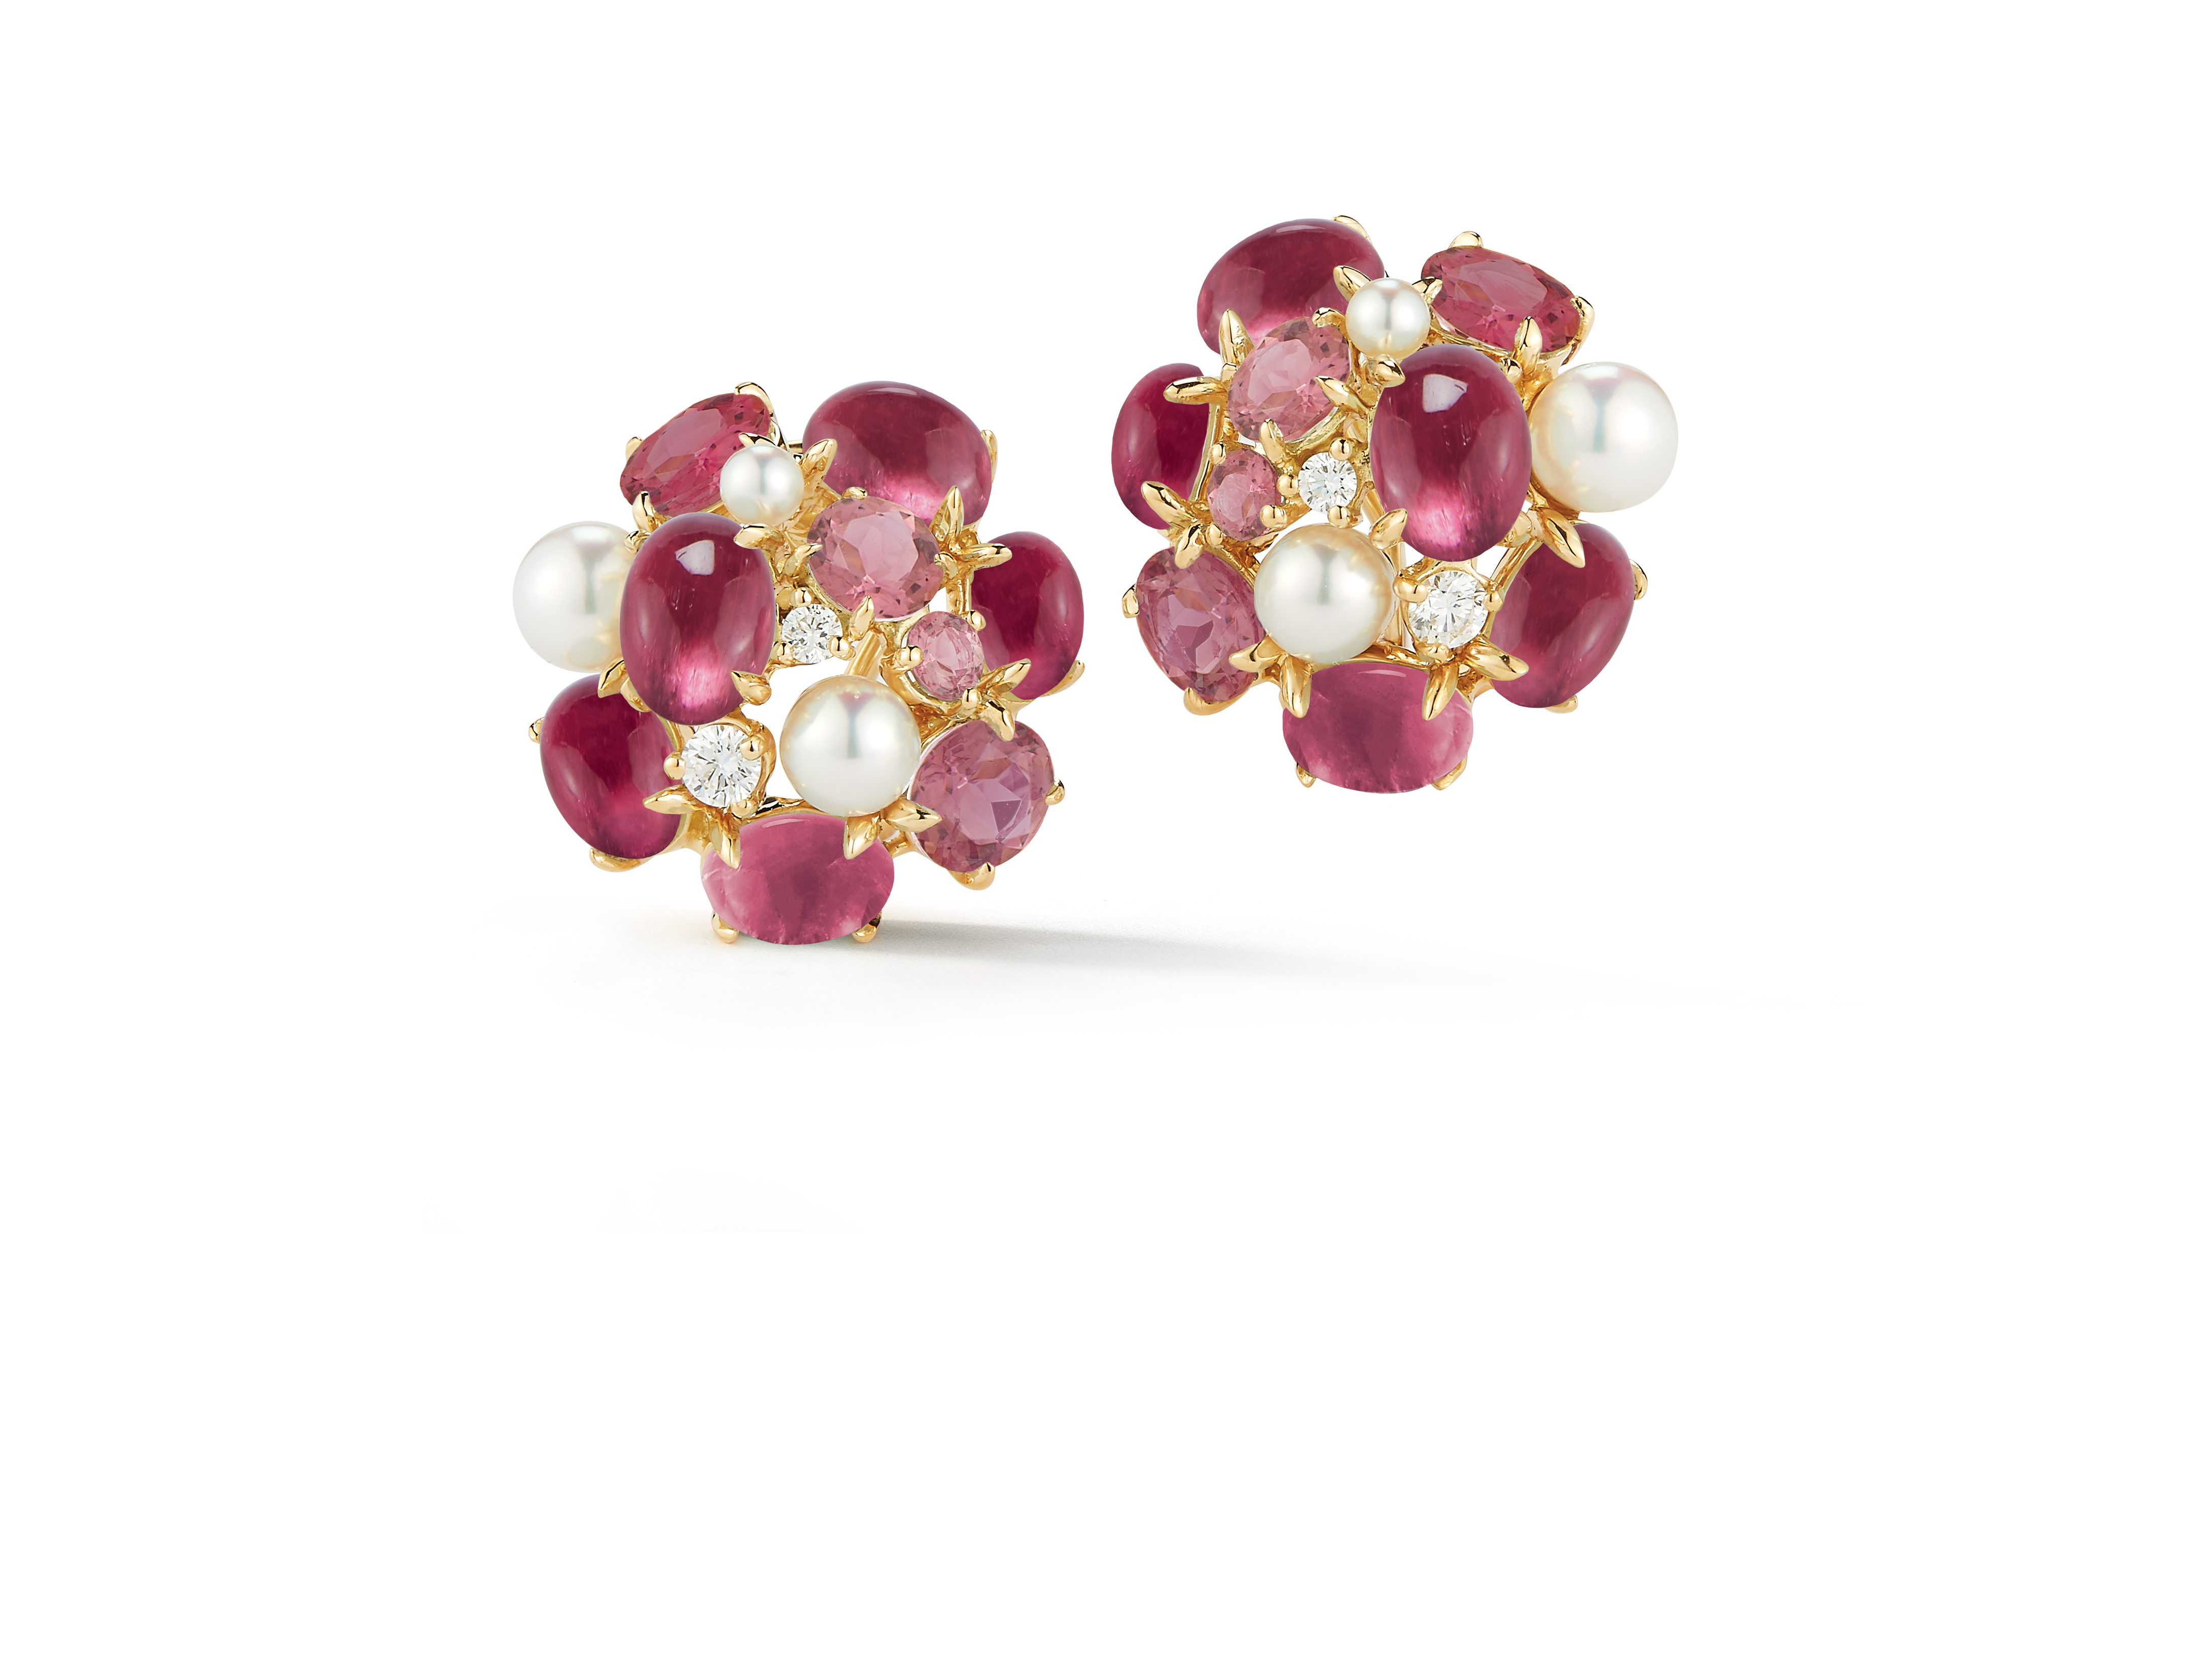 A pair of Bubble Earrings with Pink Tourmaline, Pearl, and Diamond set in 18K Yellow Gold. Signed Seaman Schepps.